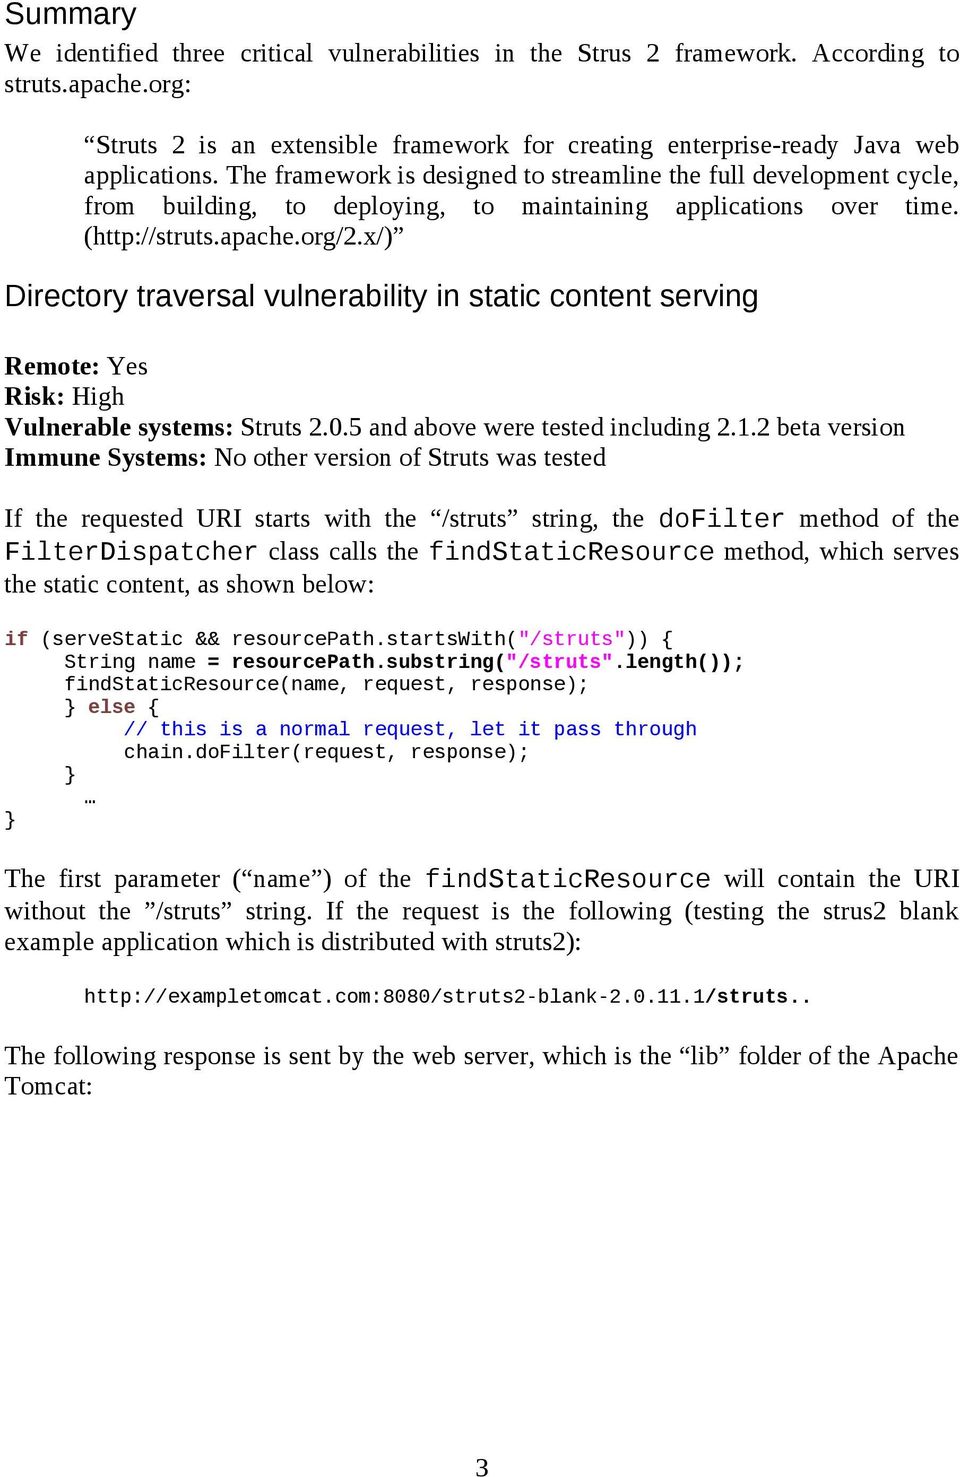 x/) Directory traversal vulnerability in static content serving Remote: Yes Risk: High Vulnerable systems: Struts 2.0.5 and above were tested including 2.1.